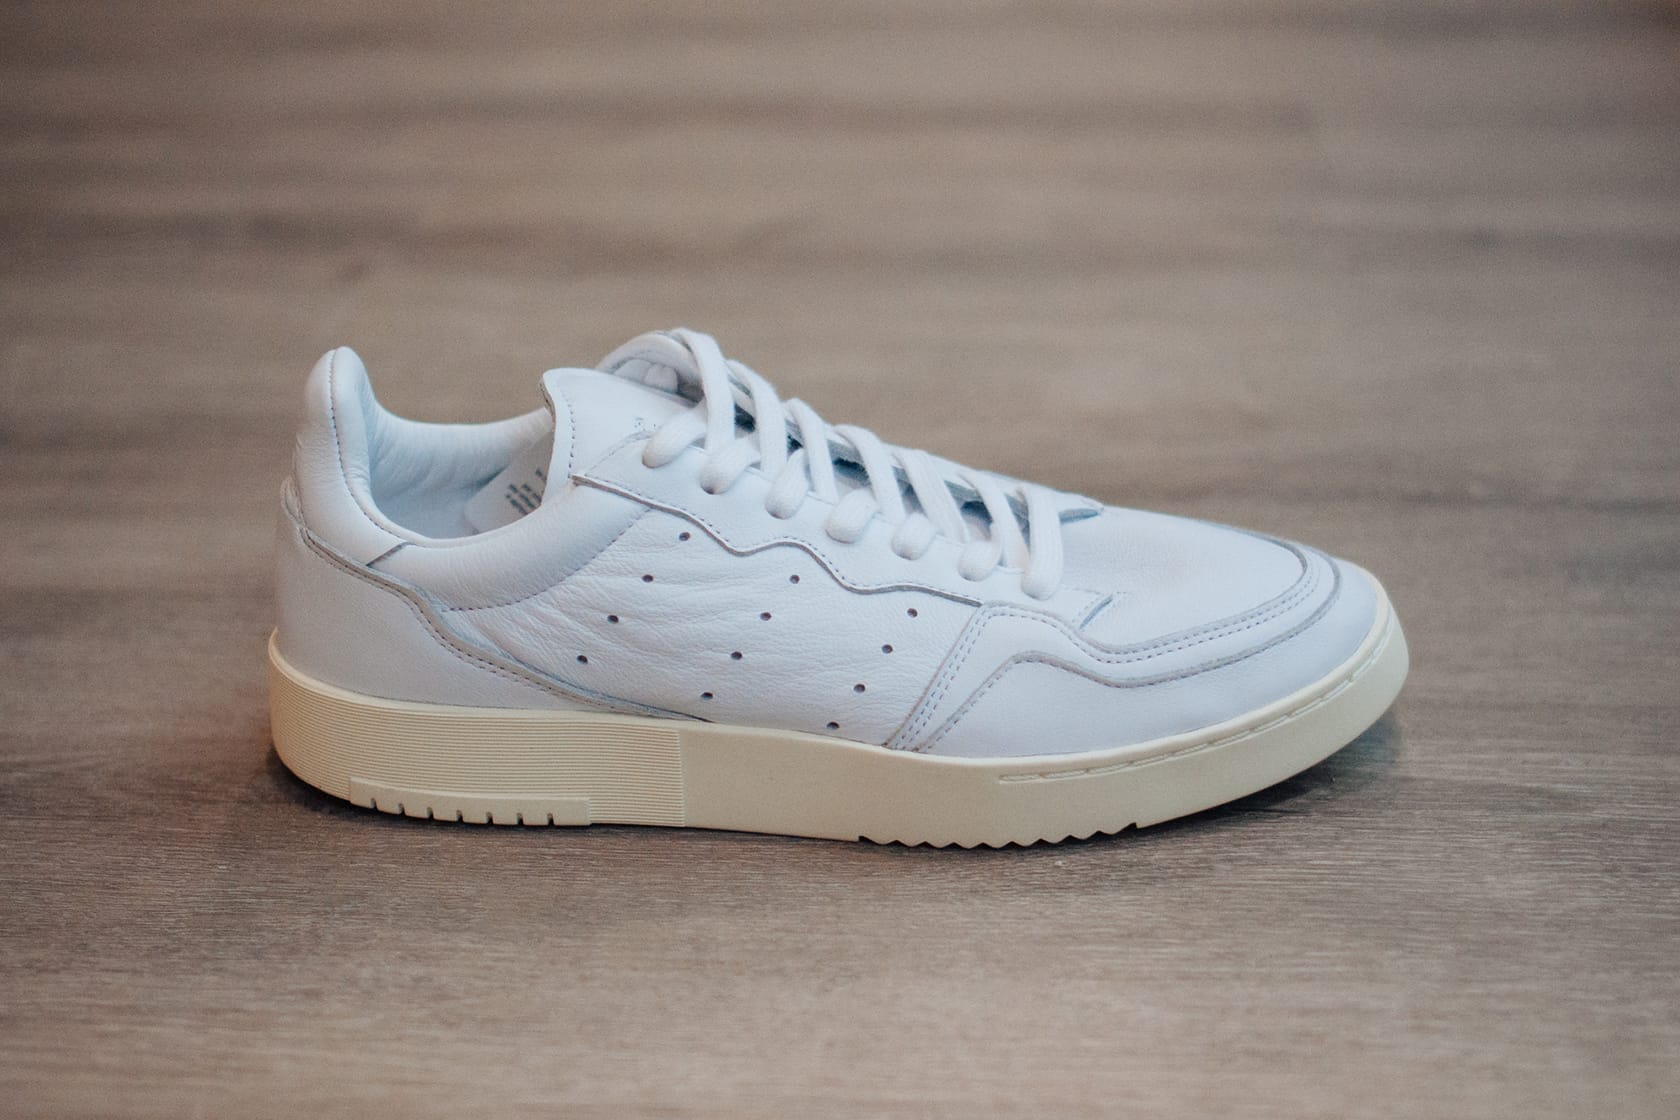 adidas originals supercourt rx trainers in white x home of classics edition